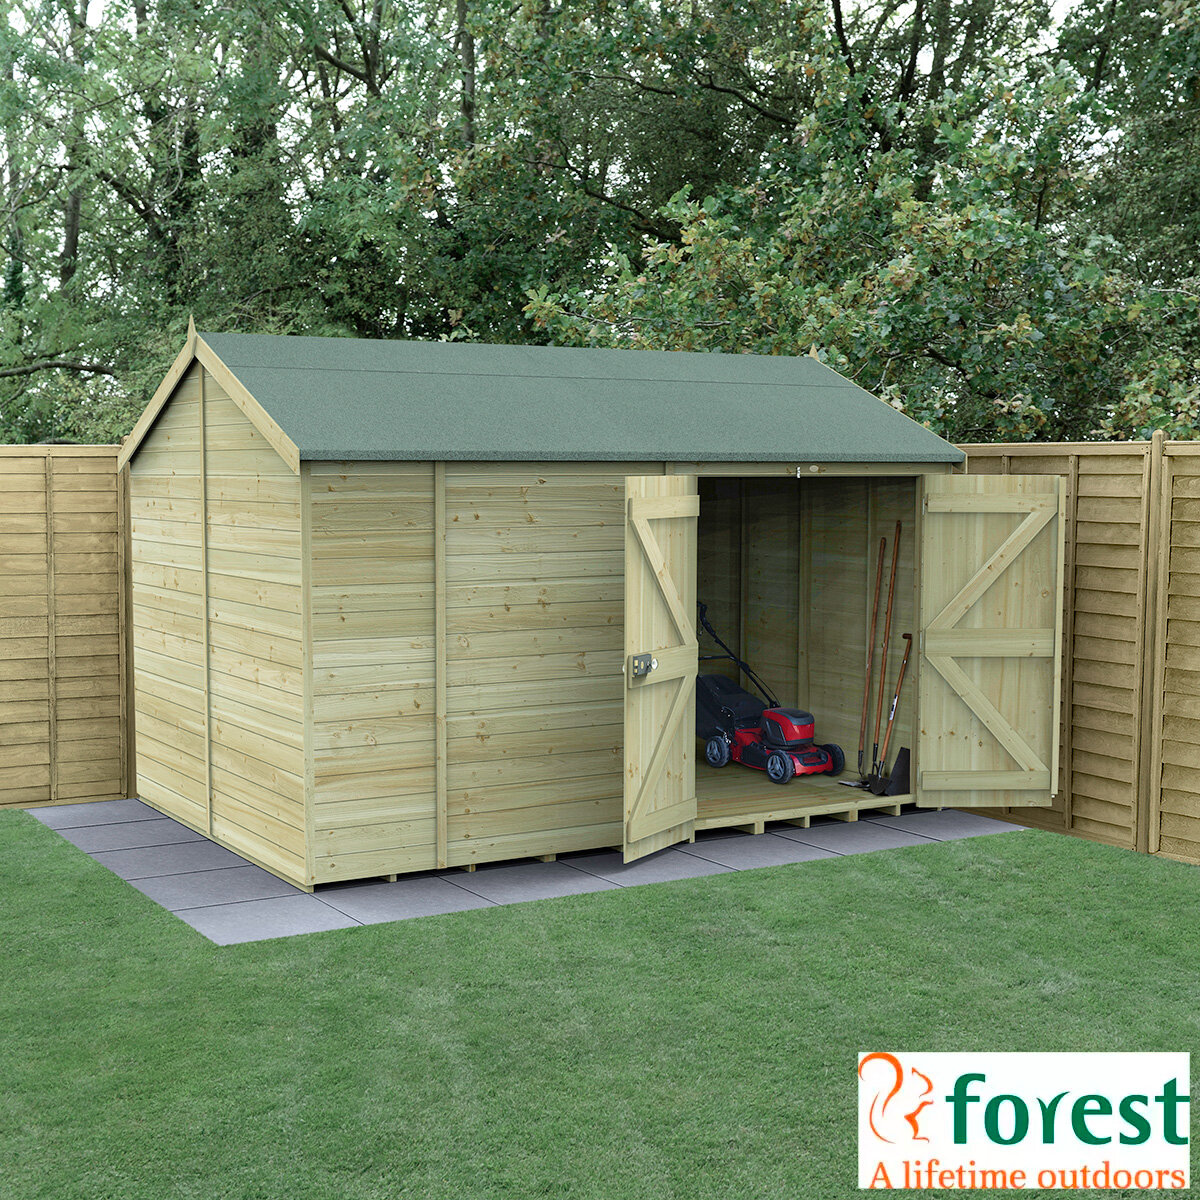 Forest Garden Timberdale 12ft x 8ft 3" (3.6 x 2.5m) Tongue & Groove Wooden Storage Shed